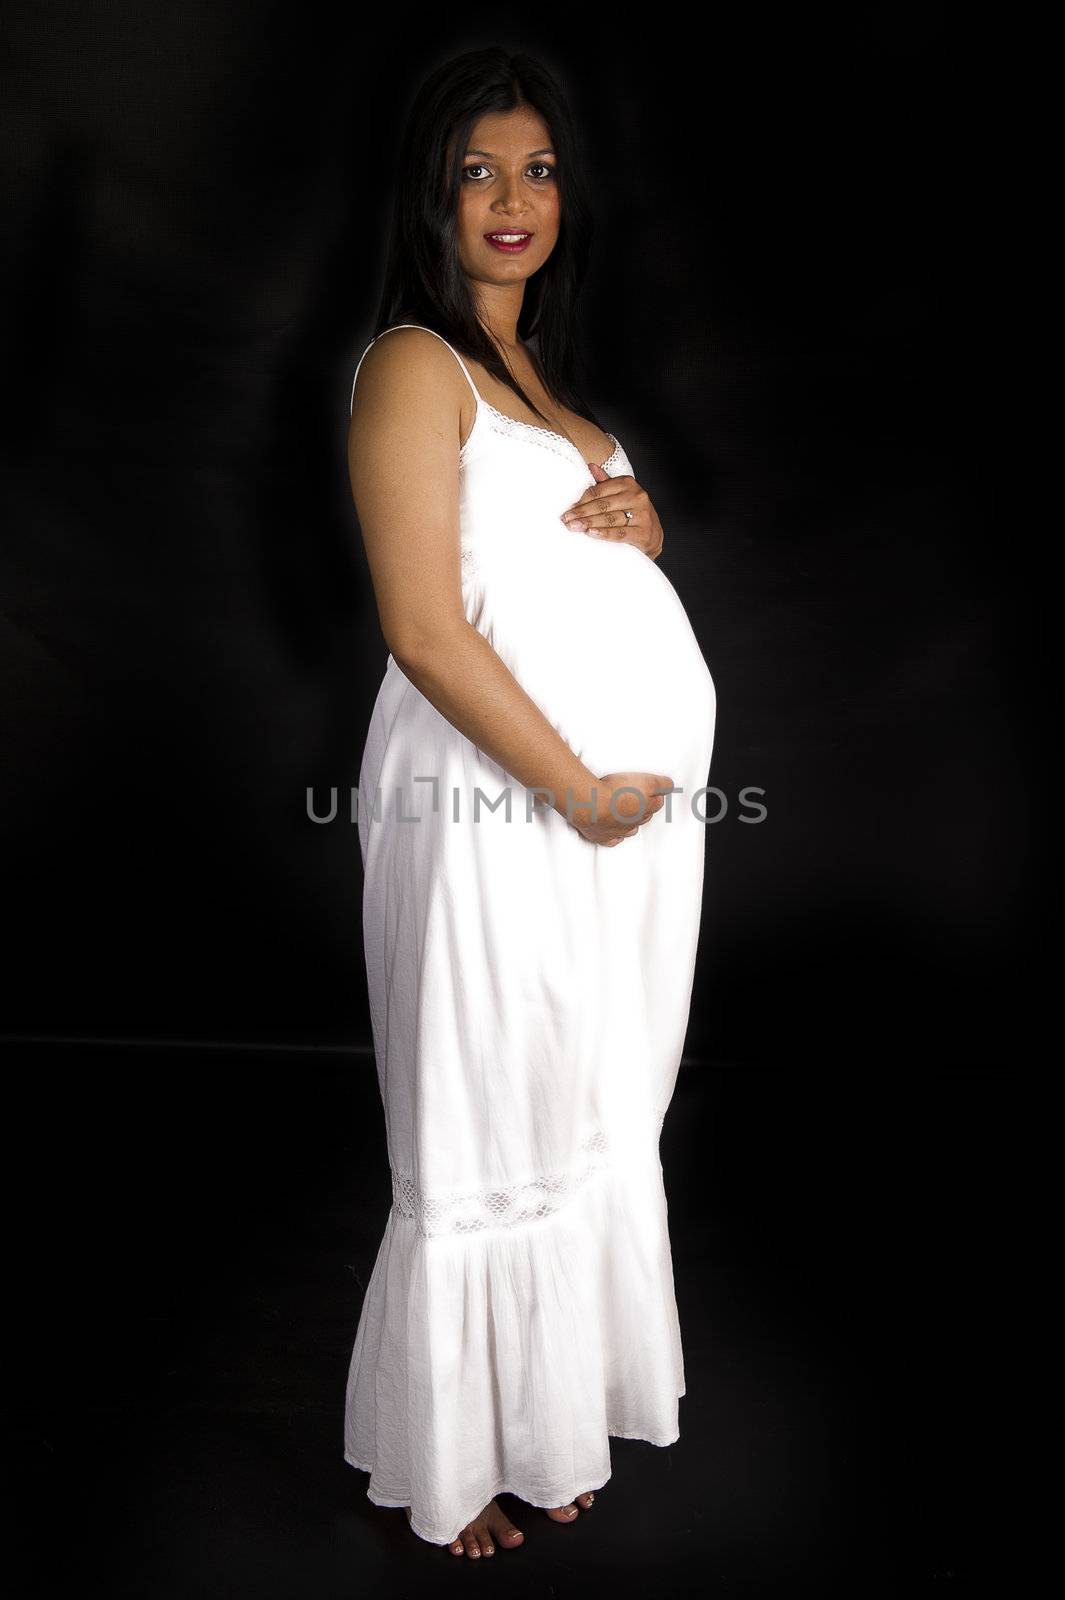 A beautiful pregnant Indian woman in white dress and angel wings by Ansunette